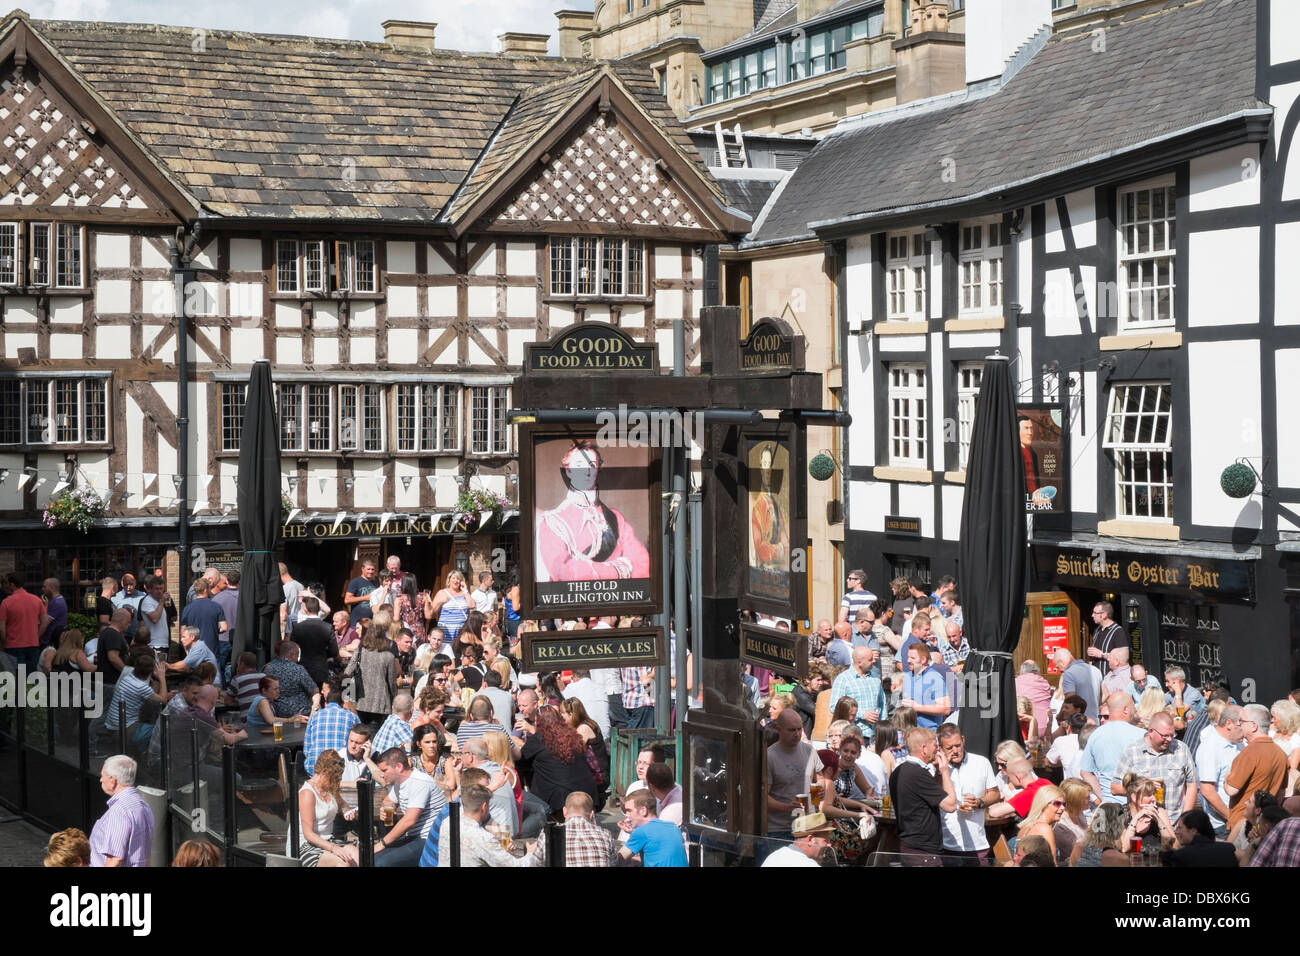 Crowds of people outside 16th century timbered The Old Wellington Inn 1552 in summer in crowded beer garden. Shambles Square Manchester England UK Stock Photo